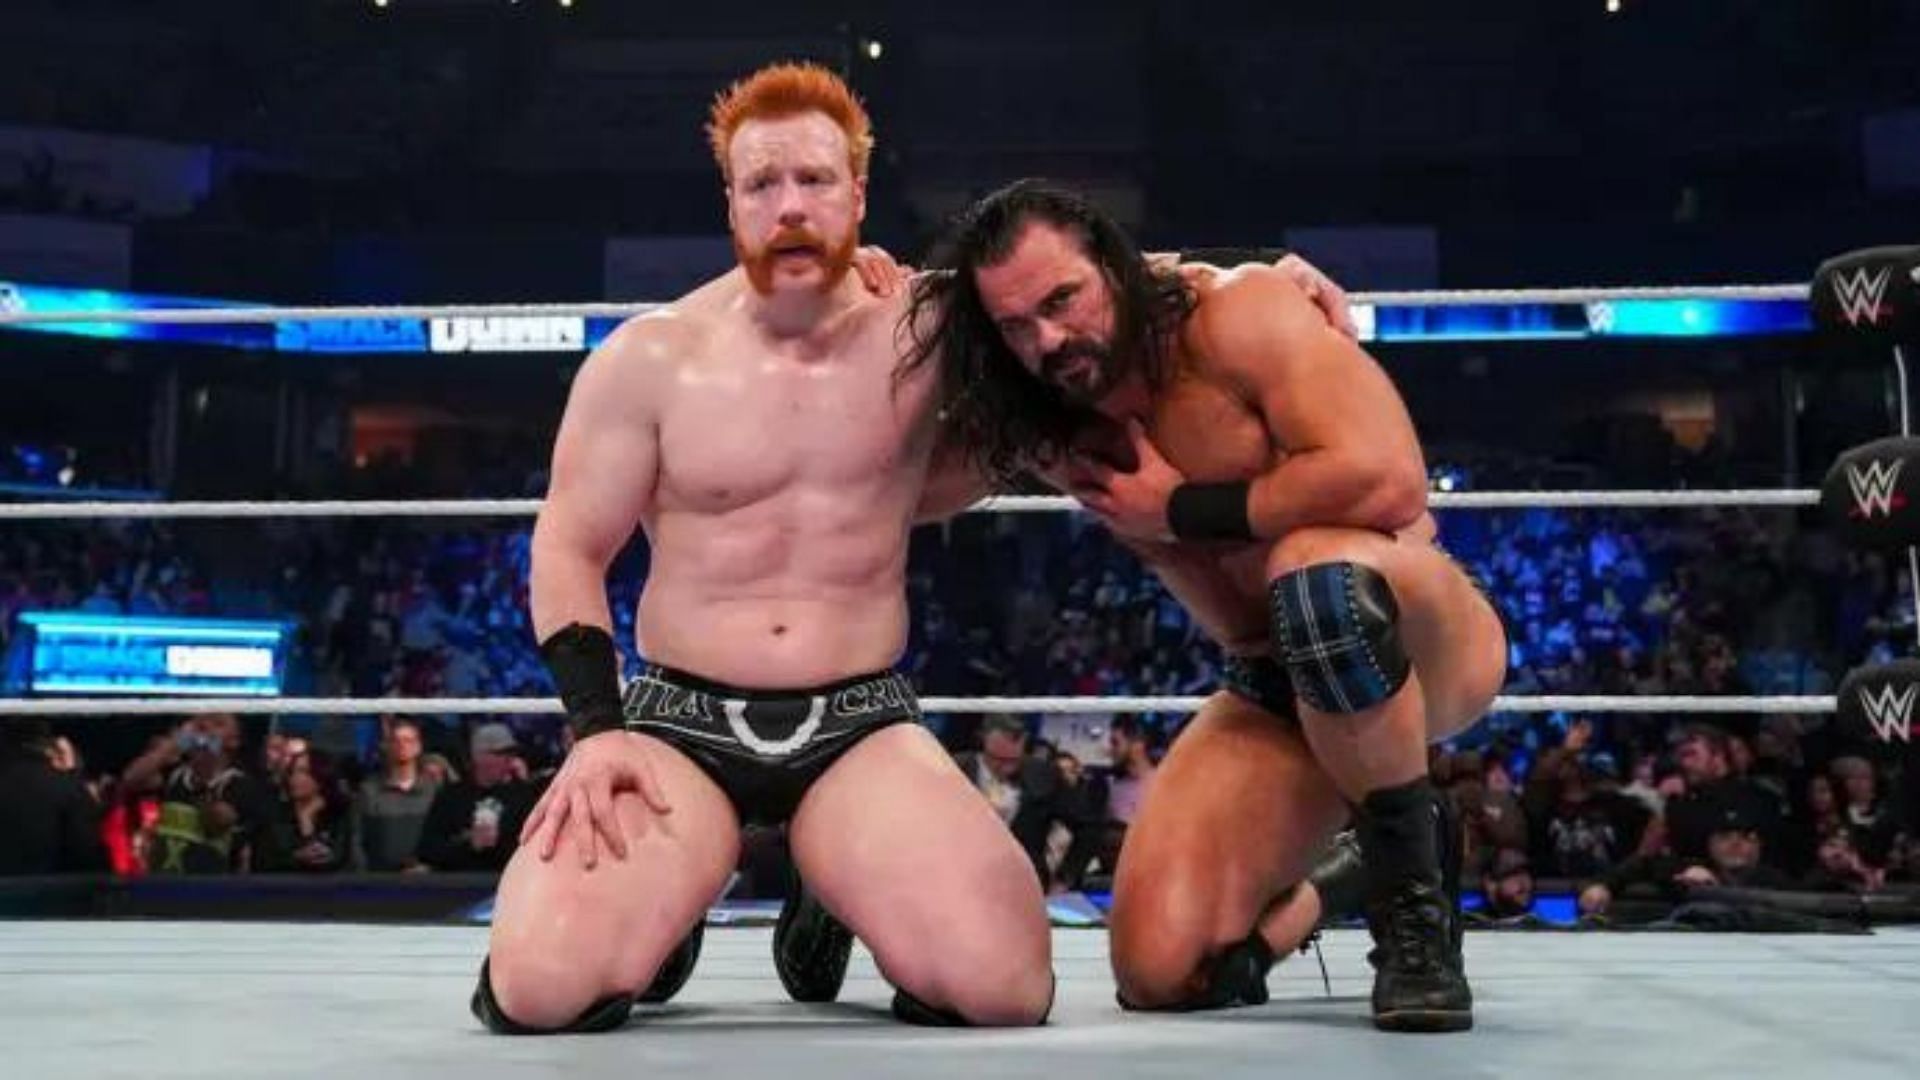 Sheamus and Drew McIntyre were attacked after the cameras stopped filming